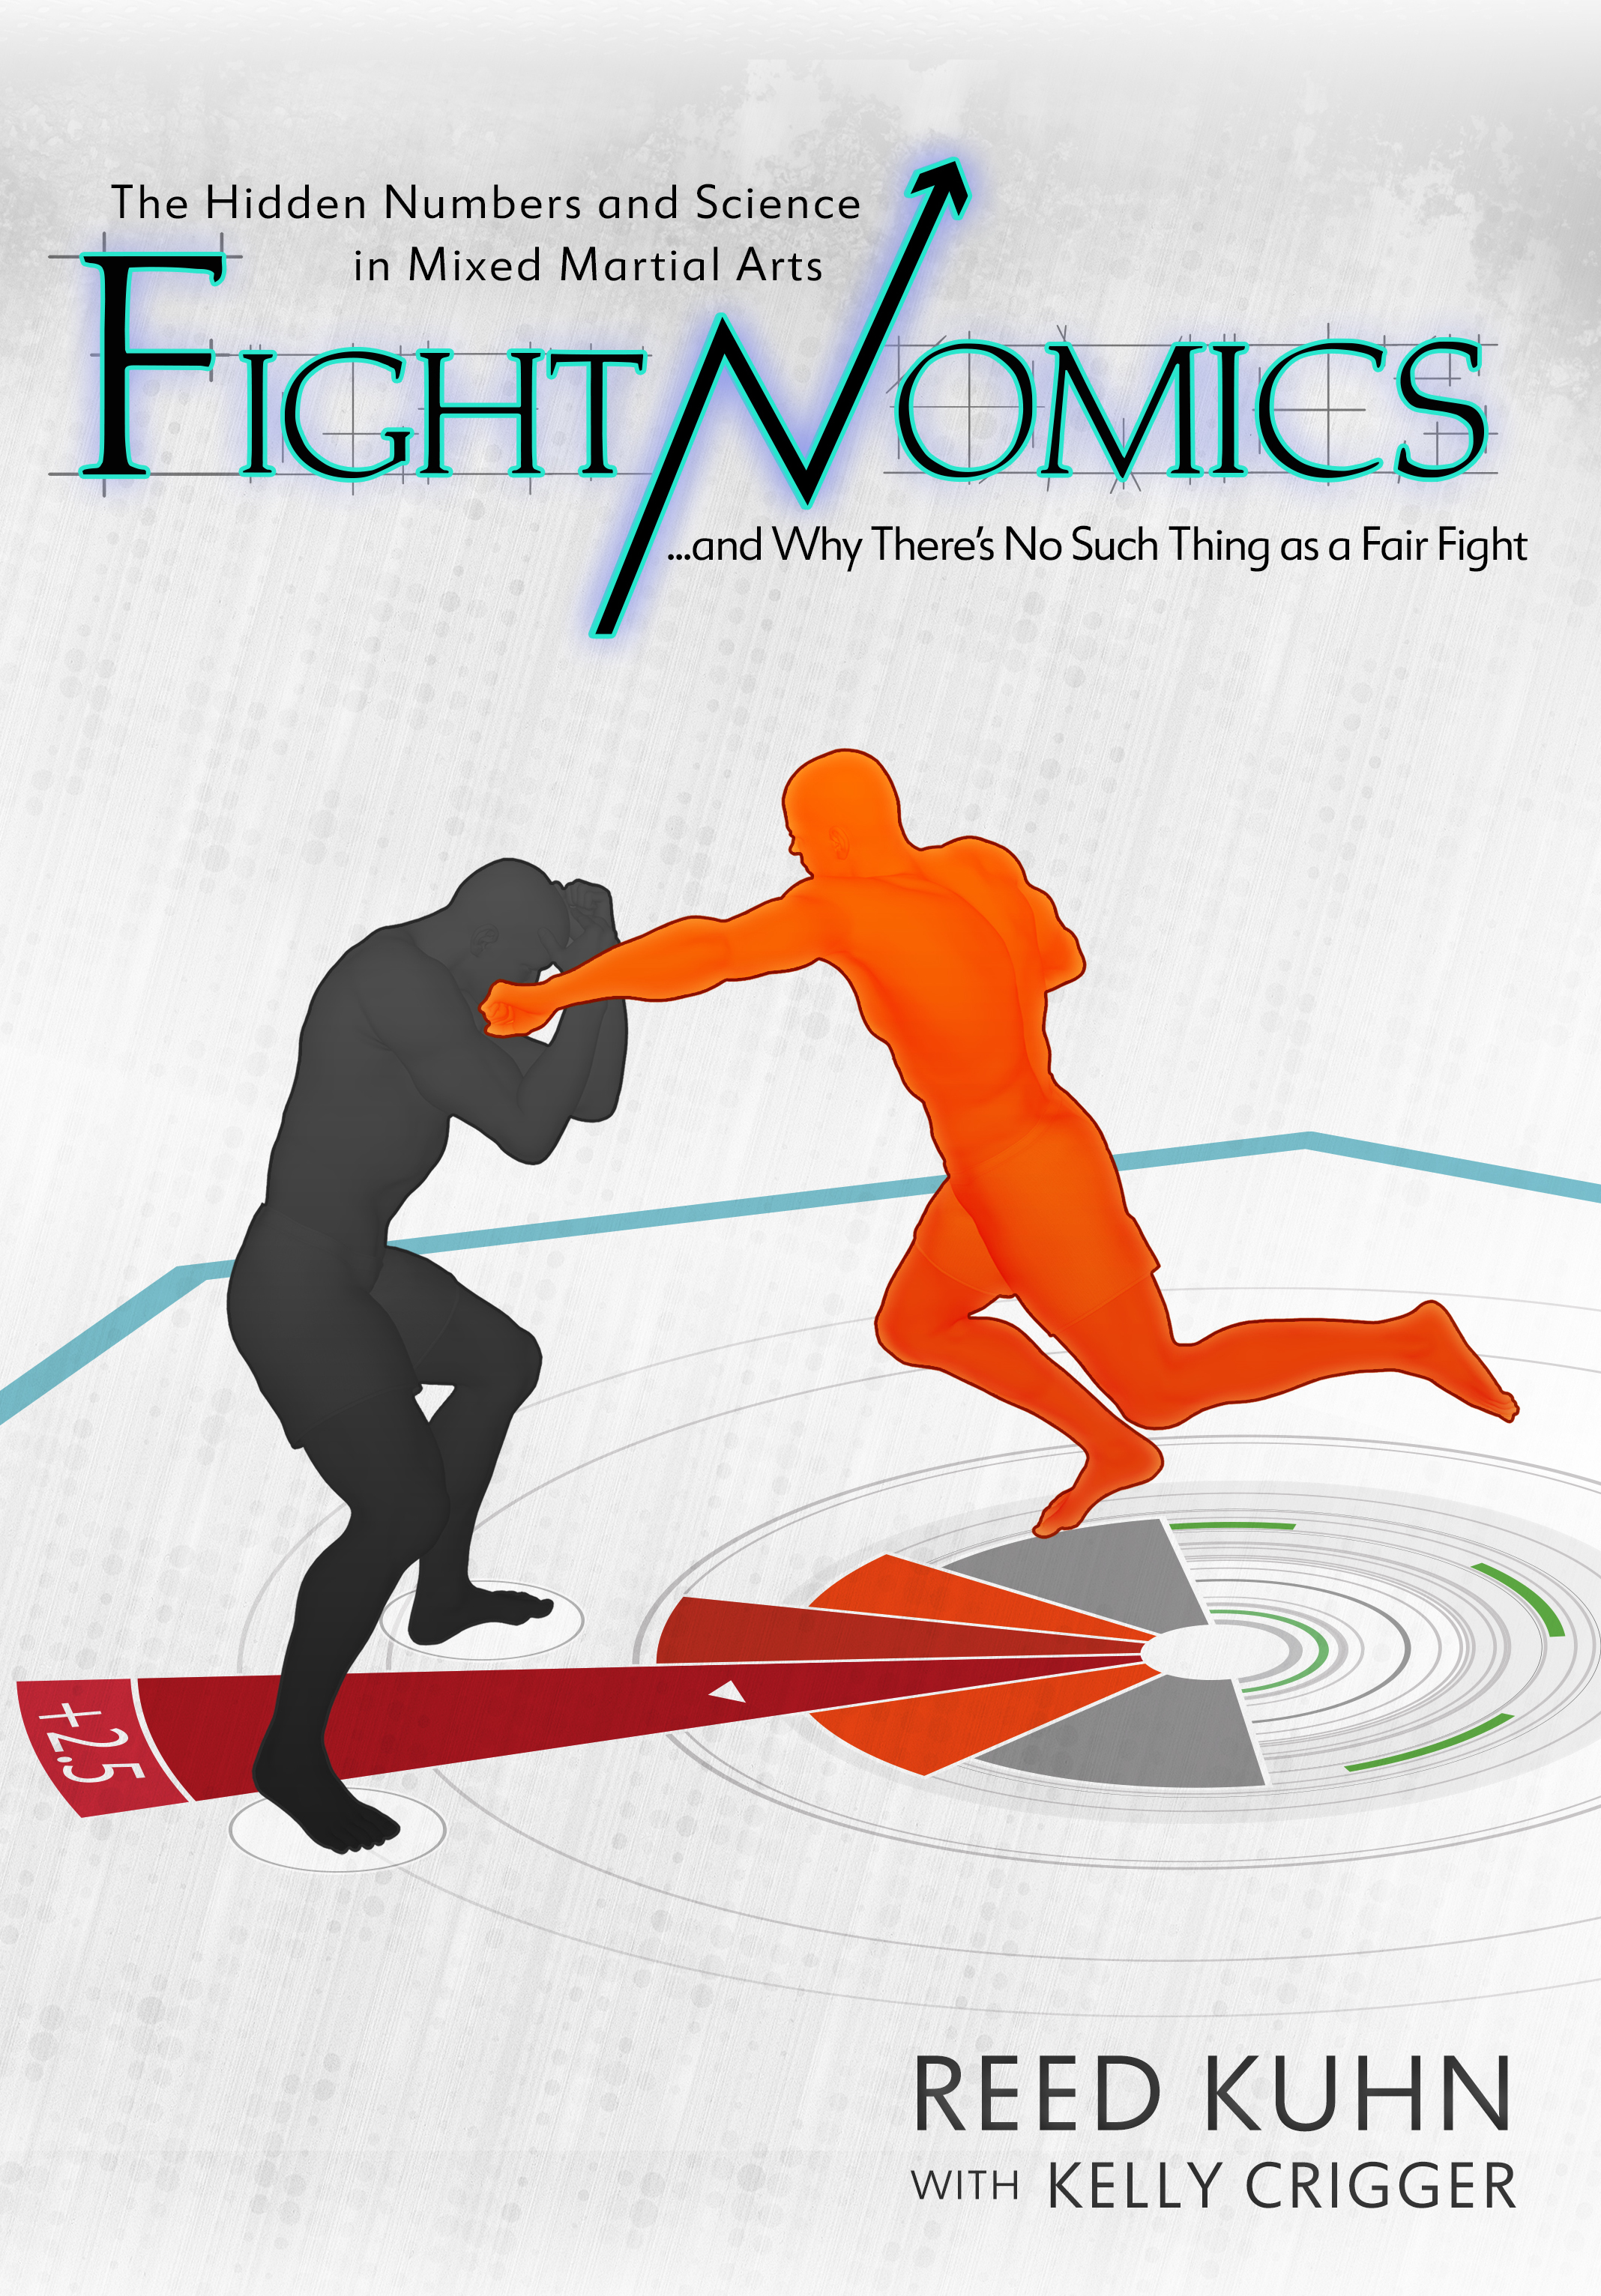 Fightnomics is the intersection of statistics and Mixed Martial Arts